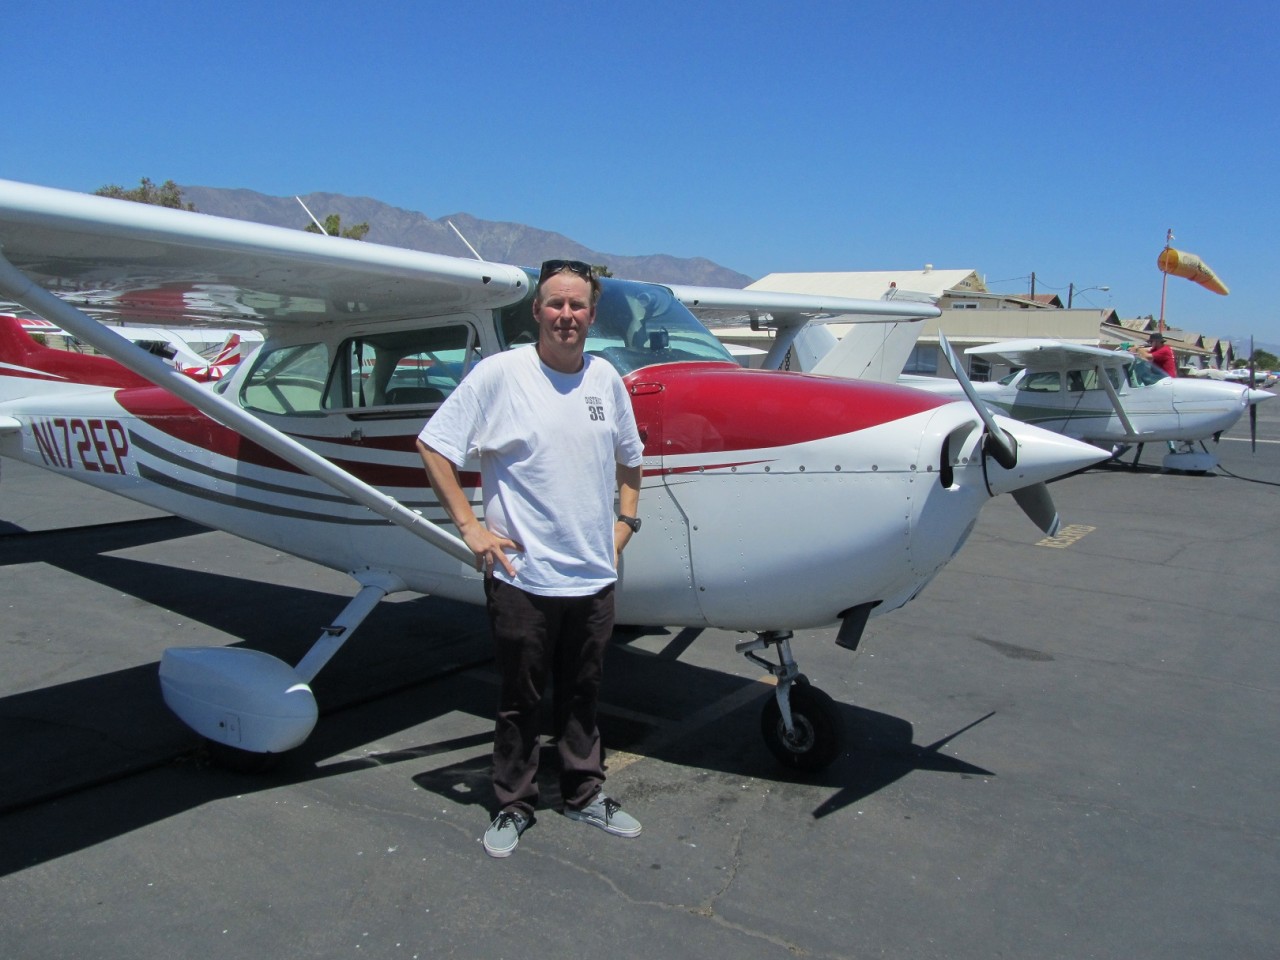 First Solo - Lance Cunningham!